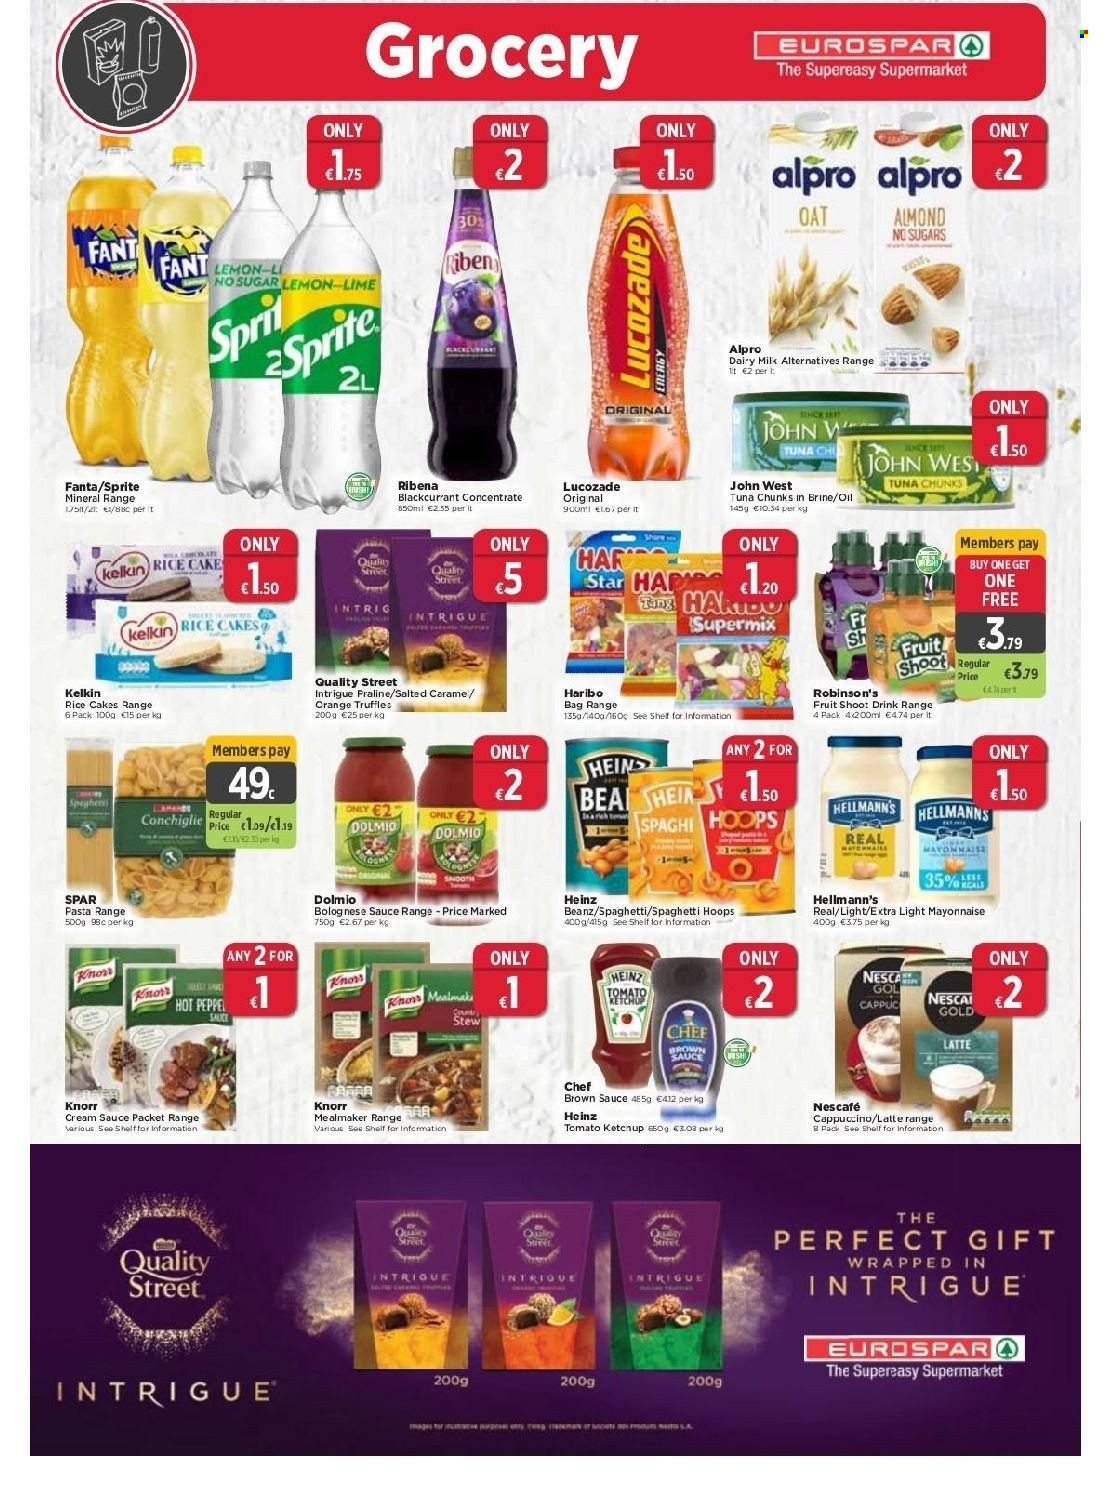 thumbnail - EUROSPAR offer  - 21.10.2021 - 10.11.2021 - Sales products - tuna, spaghetti, pasta, Knorr, sauce, Alpro, milk, mayonnaise, Hellmann’s, Haribo, truffles, Heinz, rice, ketchup, brown sauce, oil, Sprite, Fanta, Lucozade, cappuccino. Page 4.